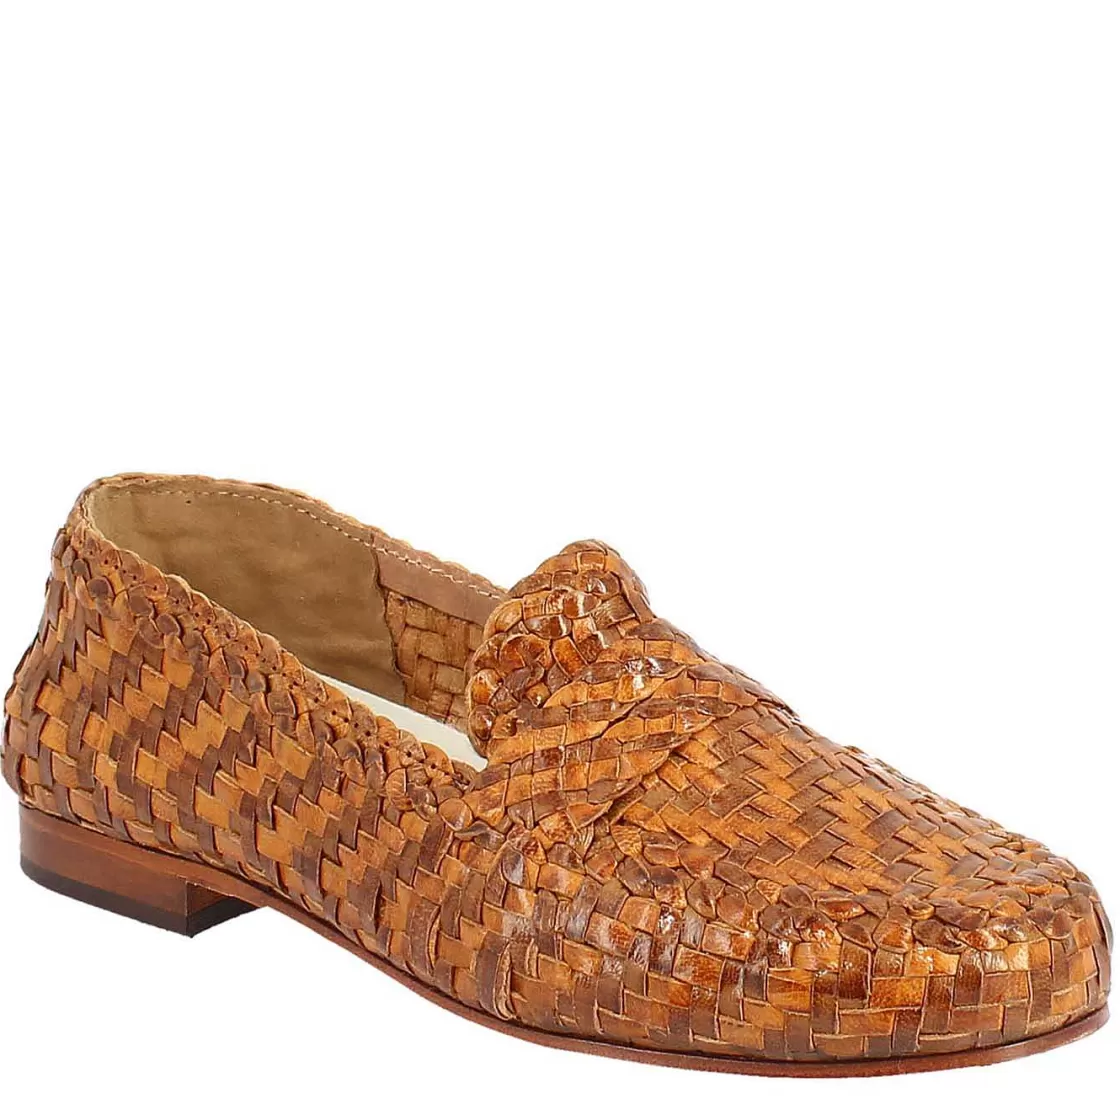 Leonardo Women'S Loafers In Brown And Honey Woven Leather Fashion